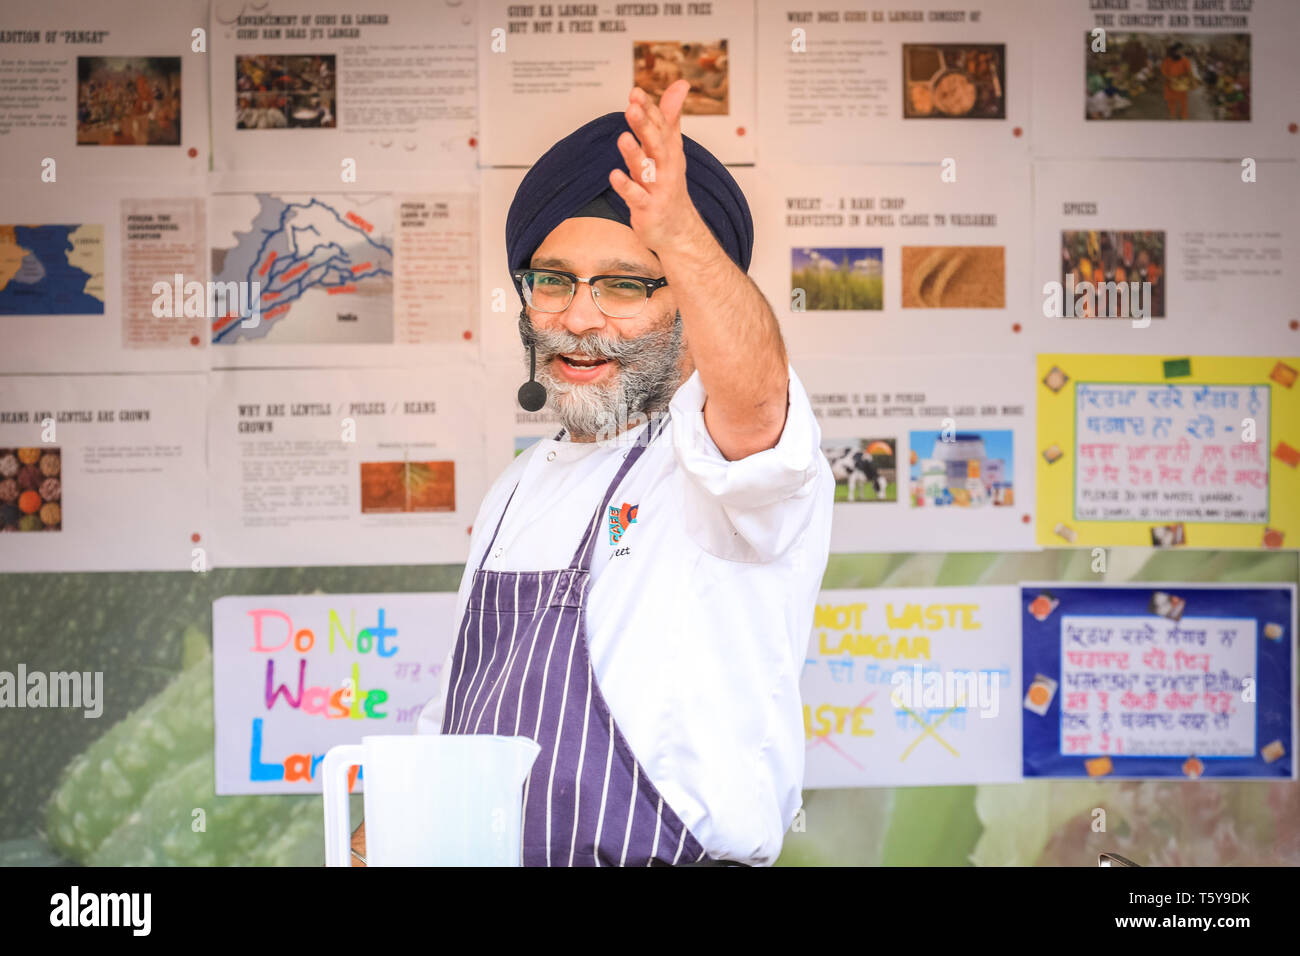 Trafalgar Square, London, UK, 27th April 2019. A Langar cooking demonstration. Vaisakhi Festival, a celebration of Sikh culture and heritage is once again brought back to Trafalgar Square. Highlights include colourful stage performances of kirtan and dharmic music, as well as food and cooking demonstrations. Credit: Imageplotter/Alamy Live News Stock Photo